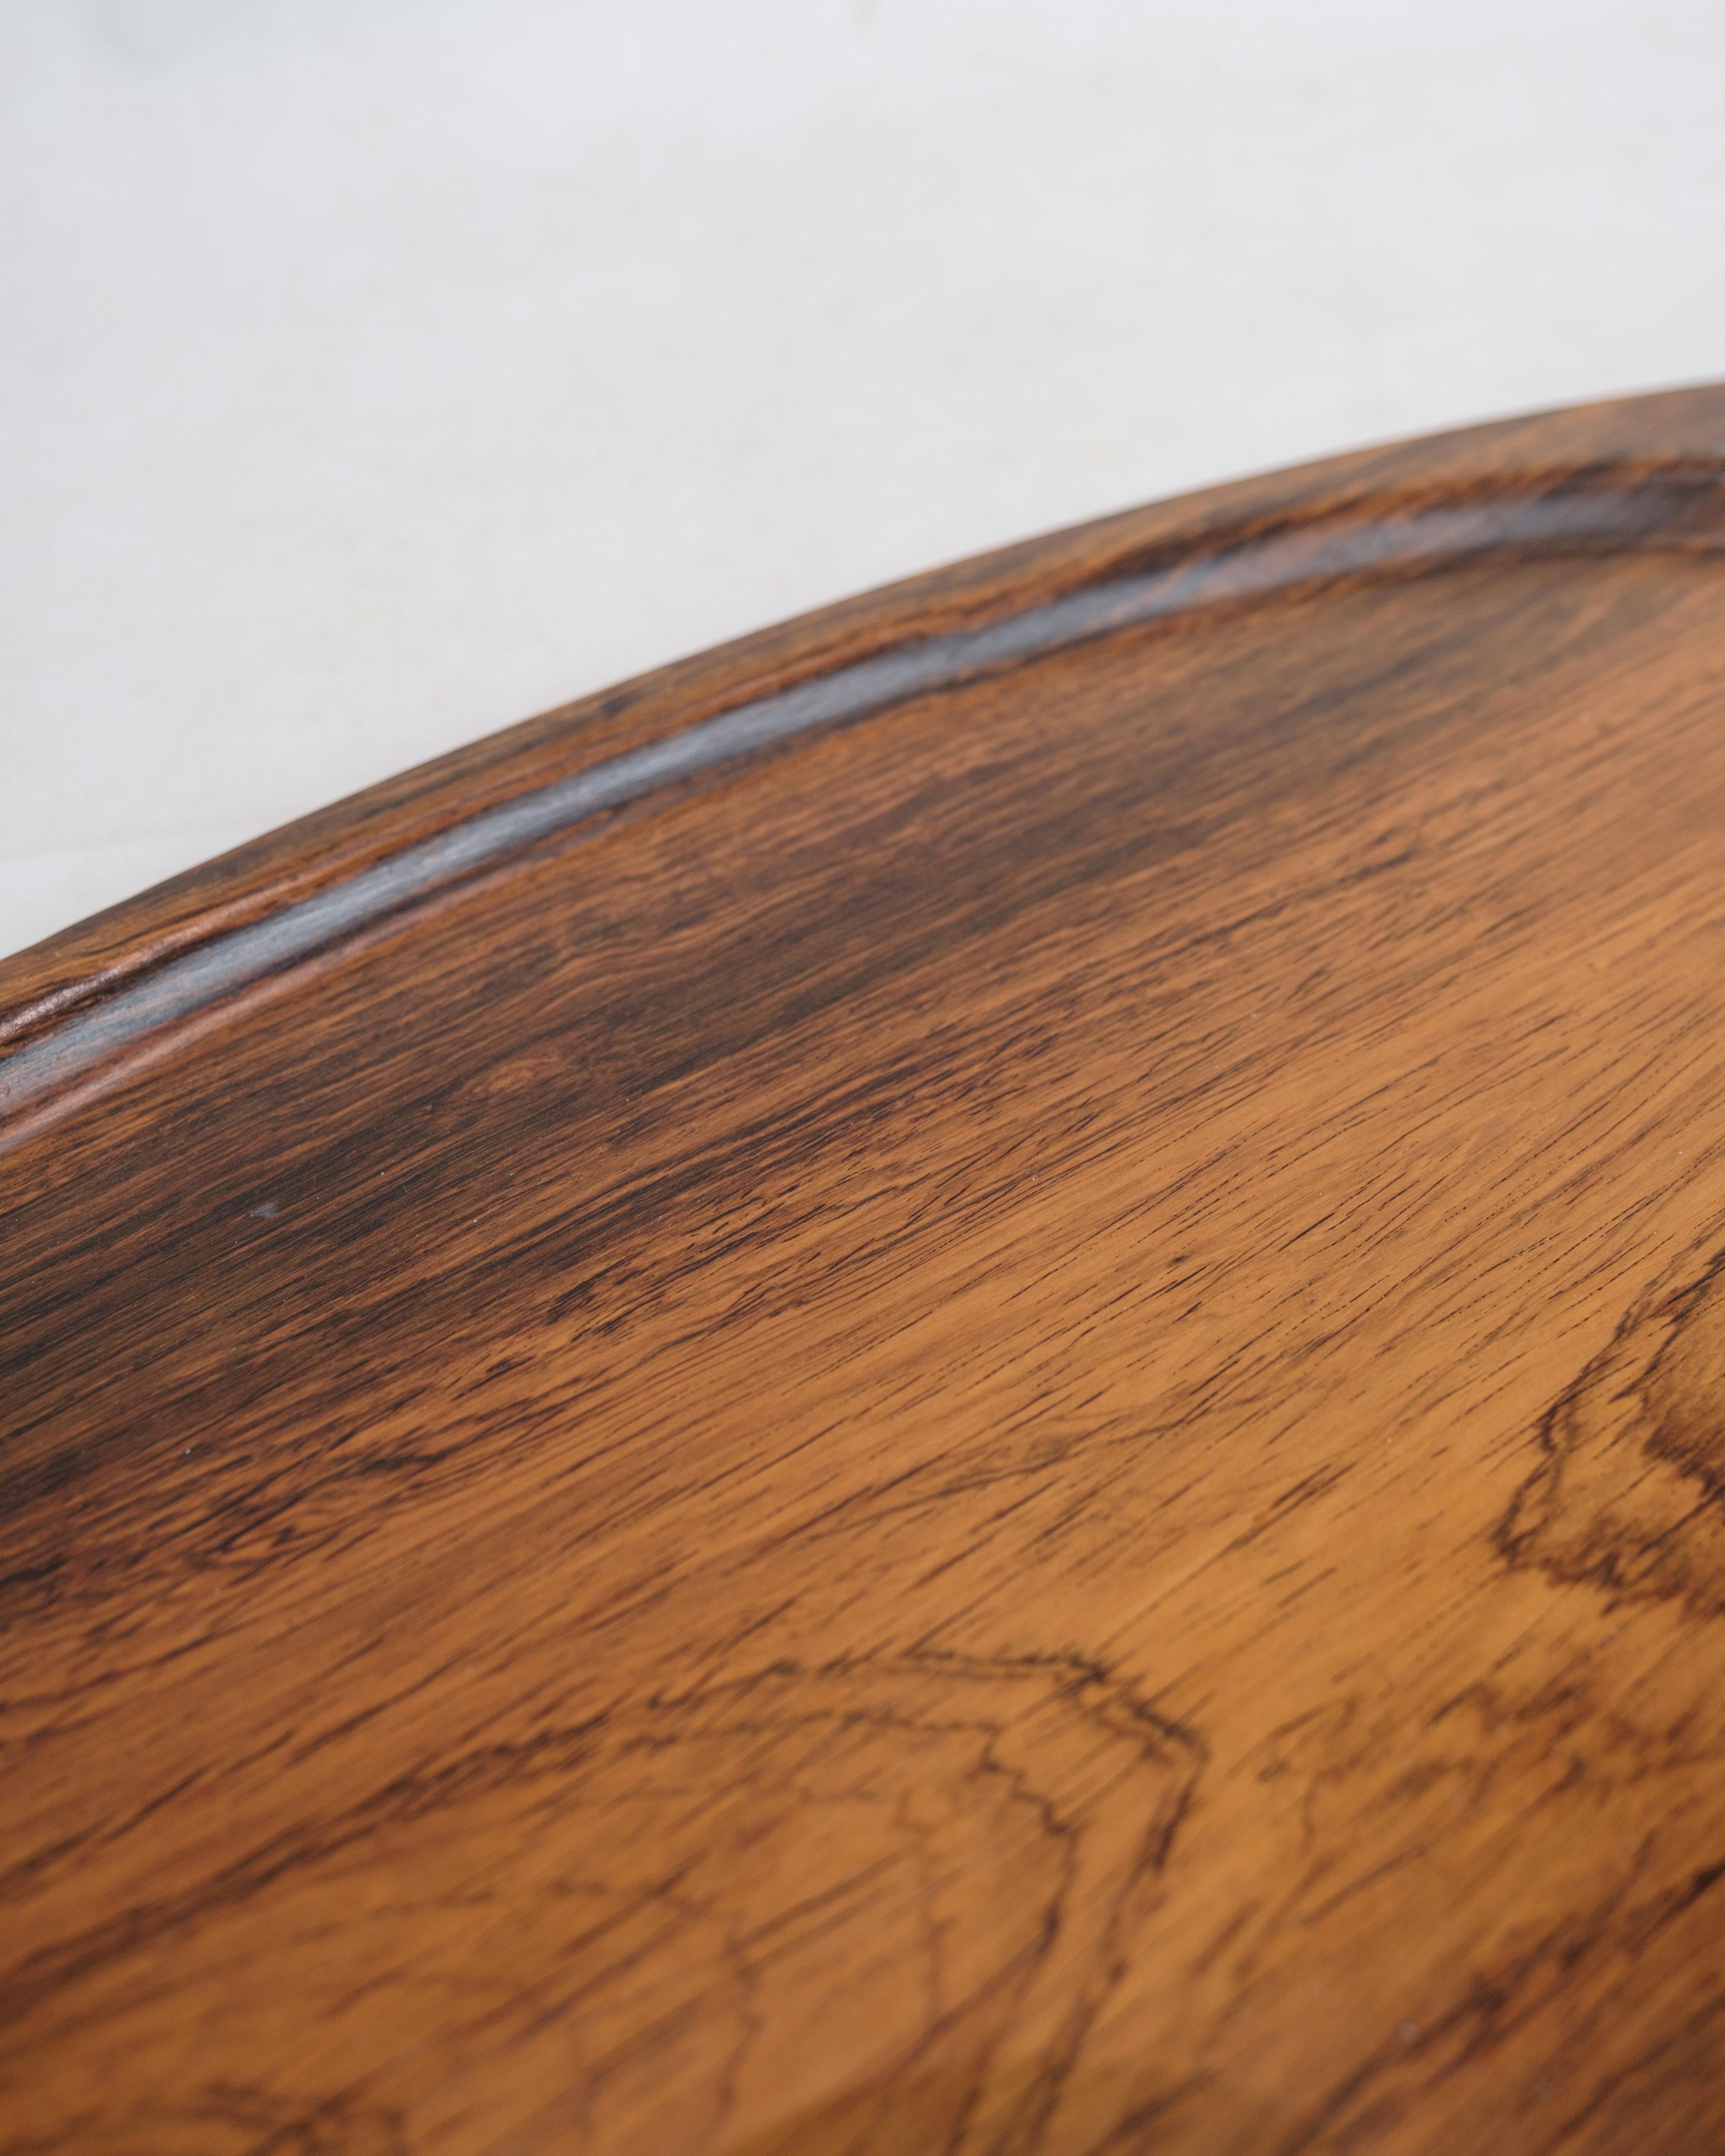 Mid-20th Century Serving Tray Made In Rosewood Made By Silva Manufacturer From 1960s